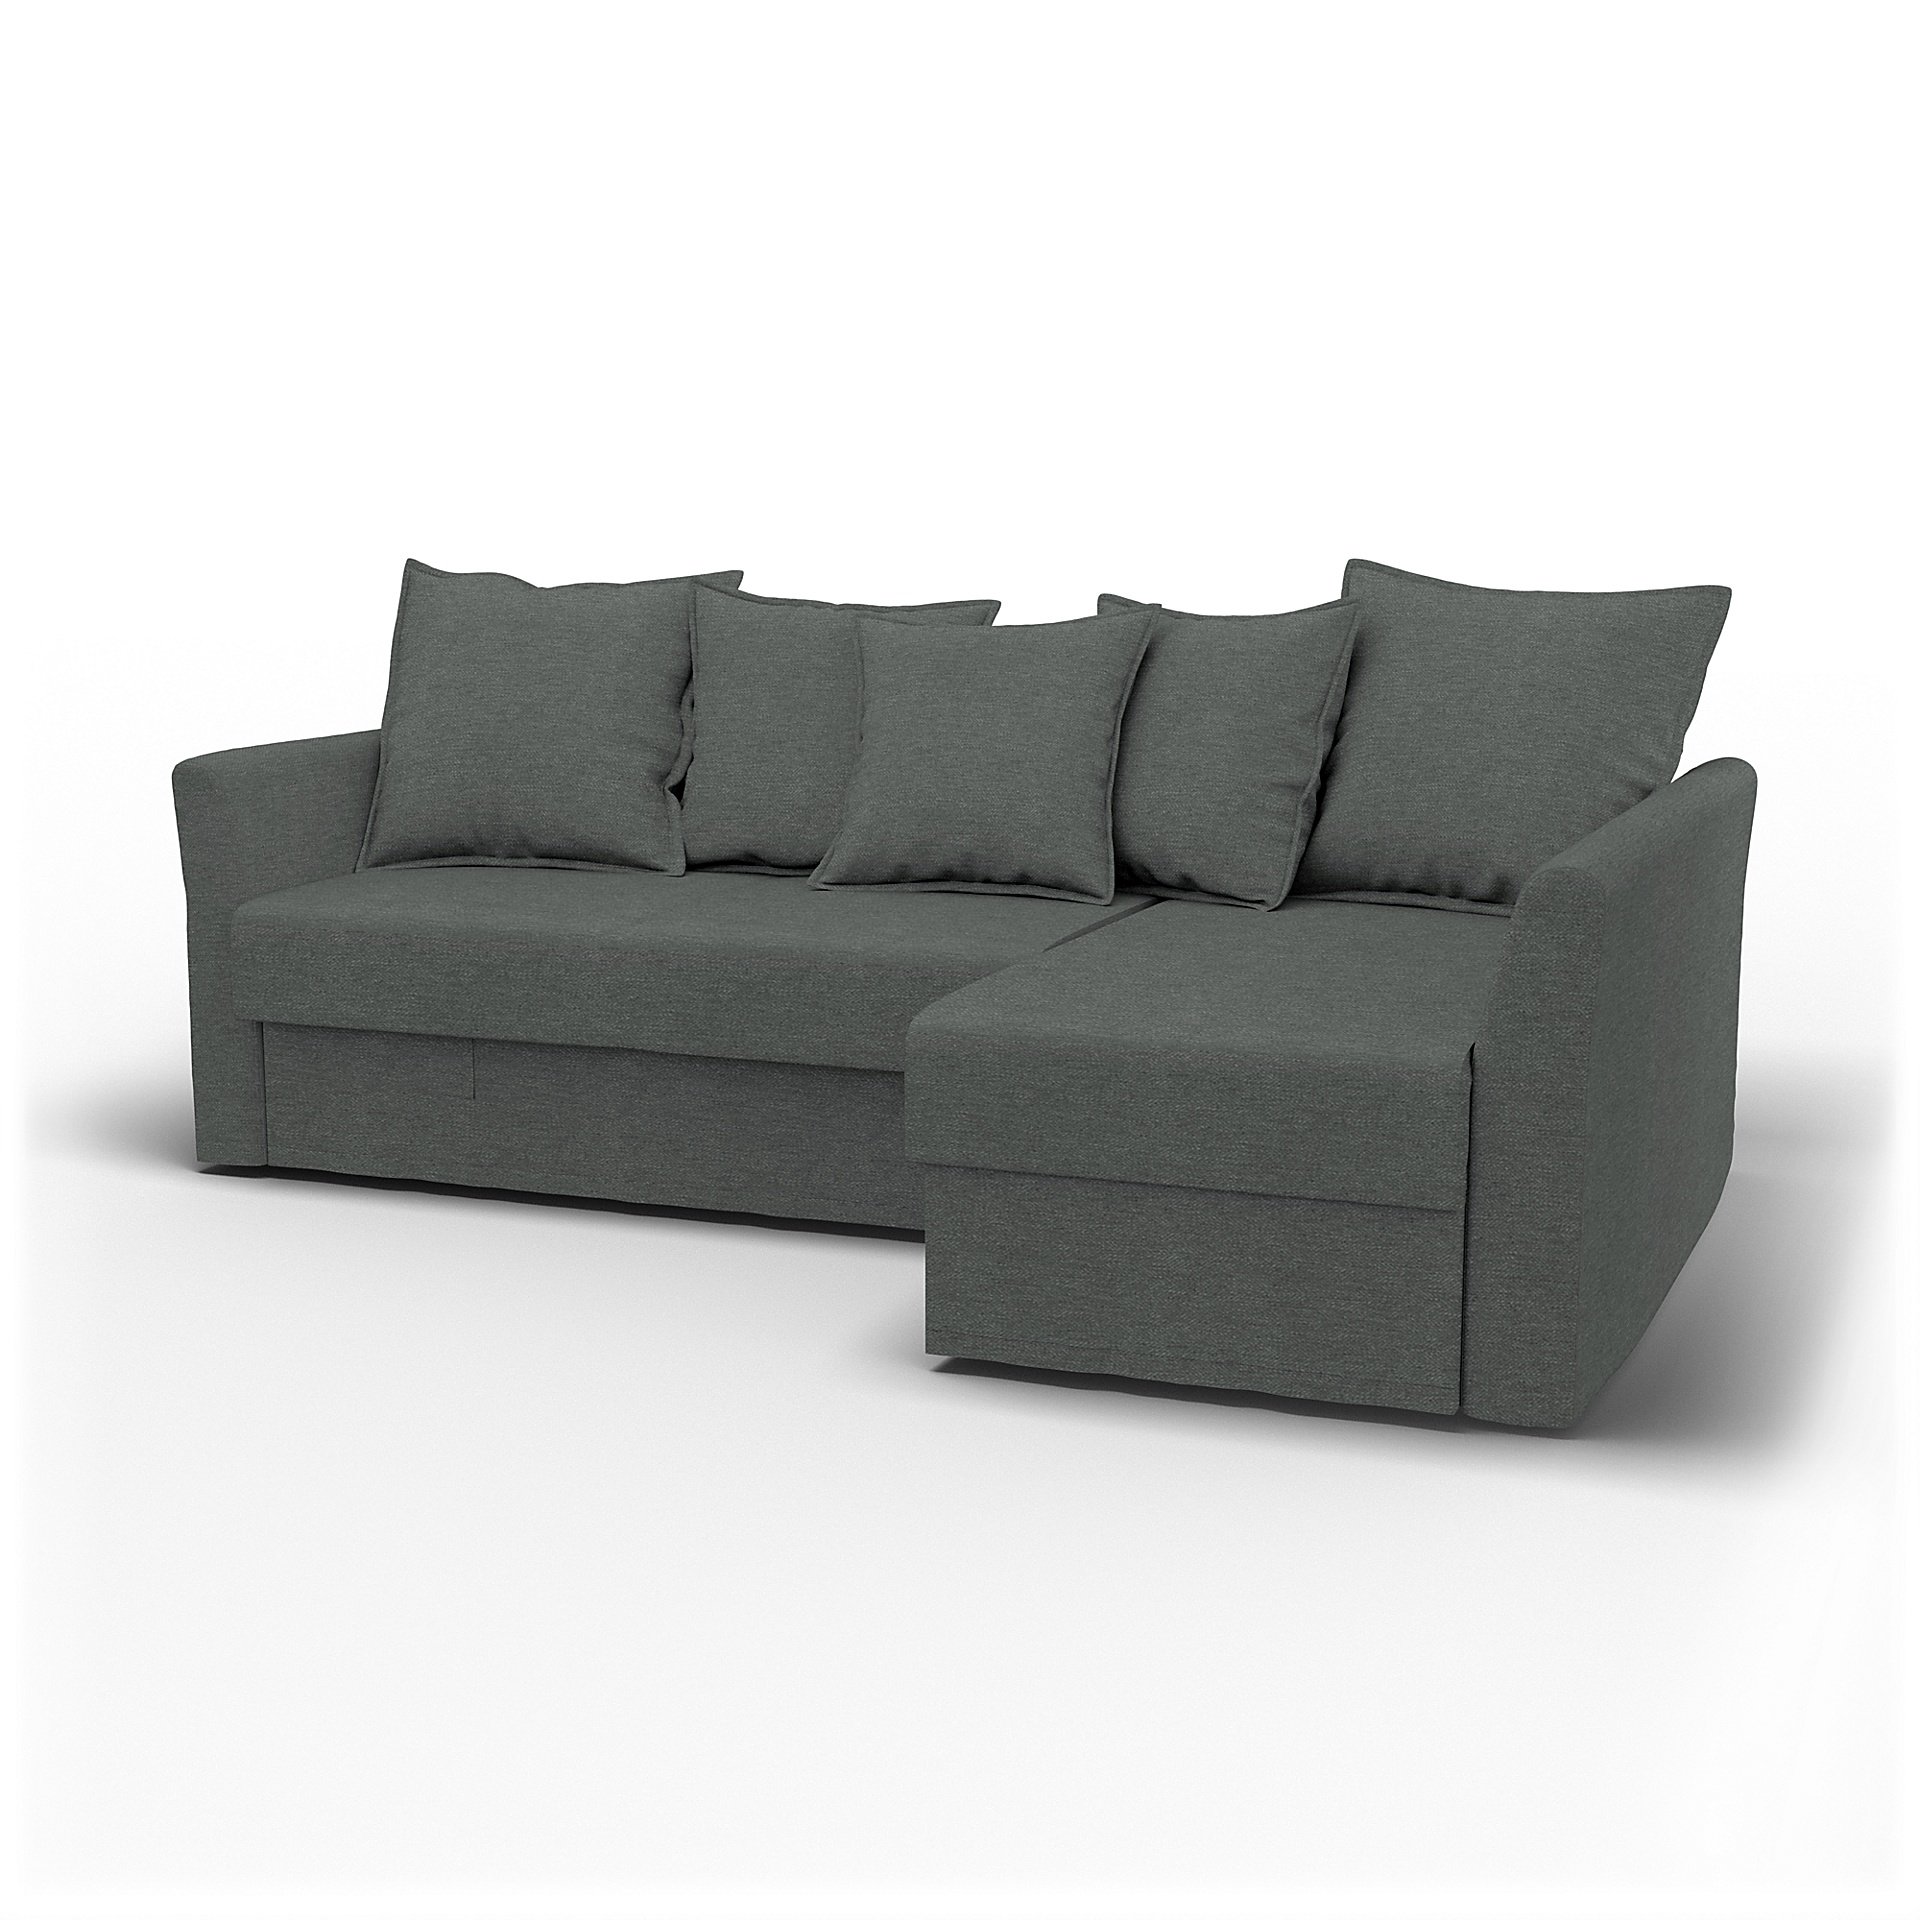 IKEA - Holmsund Sofabed with Chaiselongue, Laurel, Boucle & Texture - Bemz